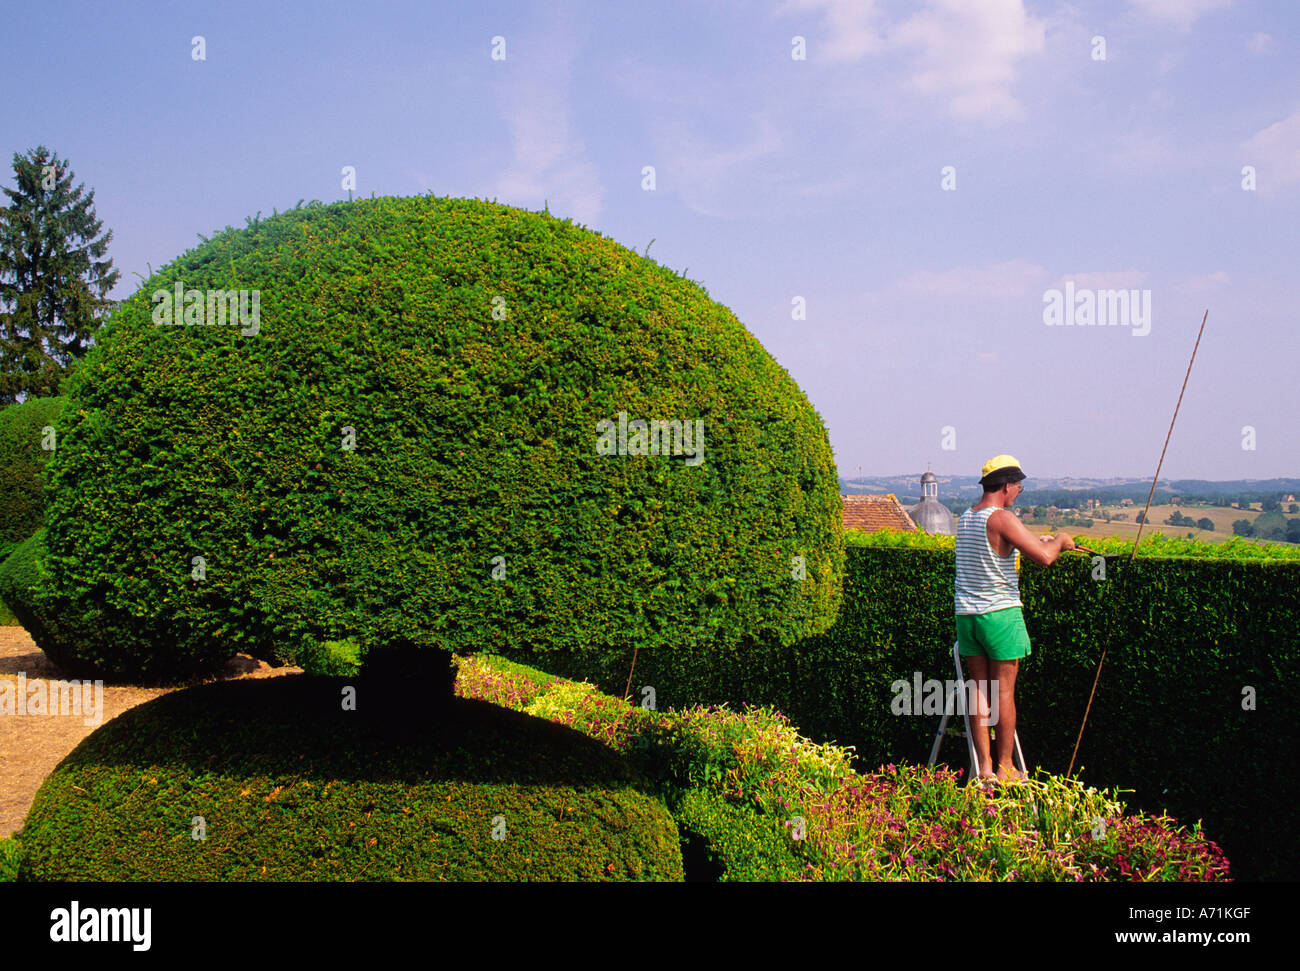 France Dordogne Valley Chateau de Hautefort Gardner Clipping Hedge in Topiary Garden Europe Stock Photo